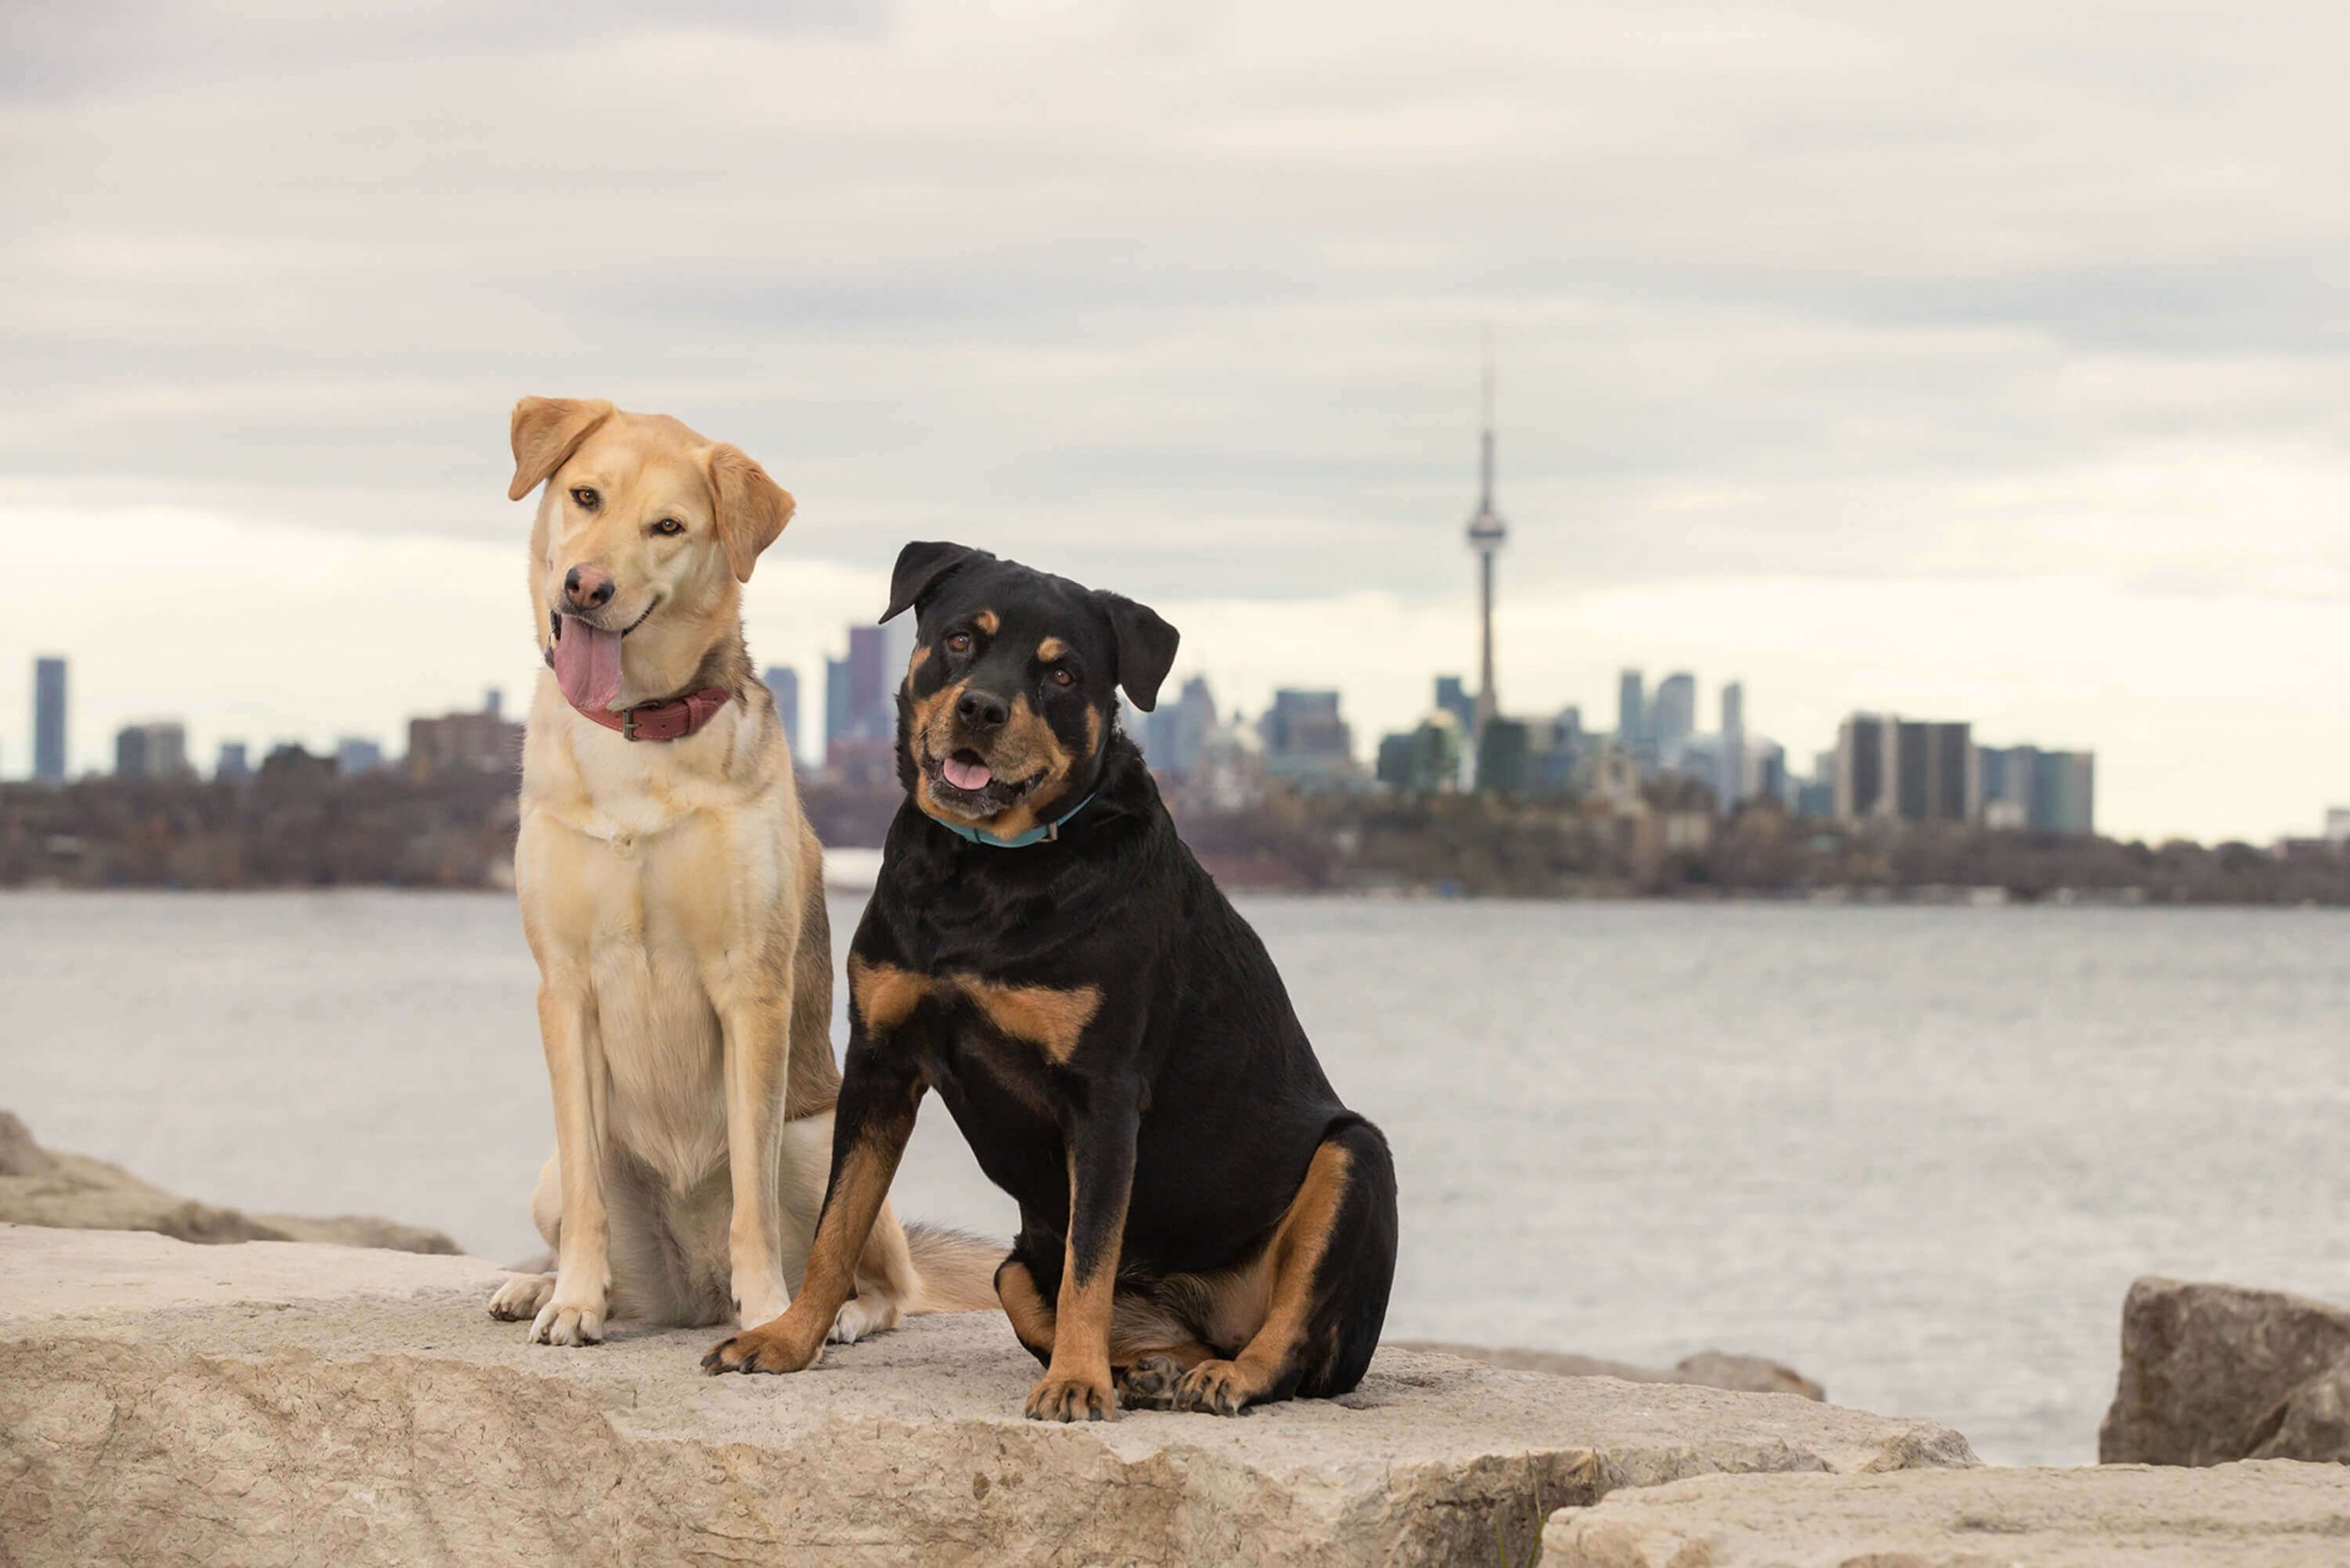 Toronto's Tails of the World pet photography promotion